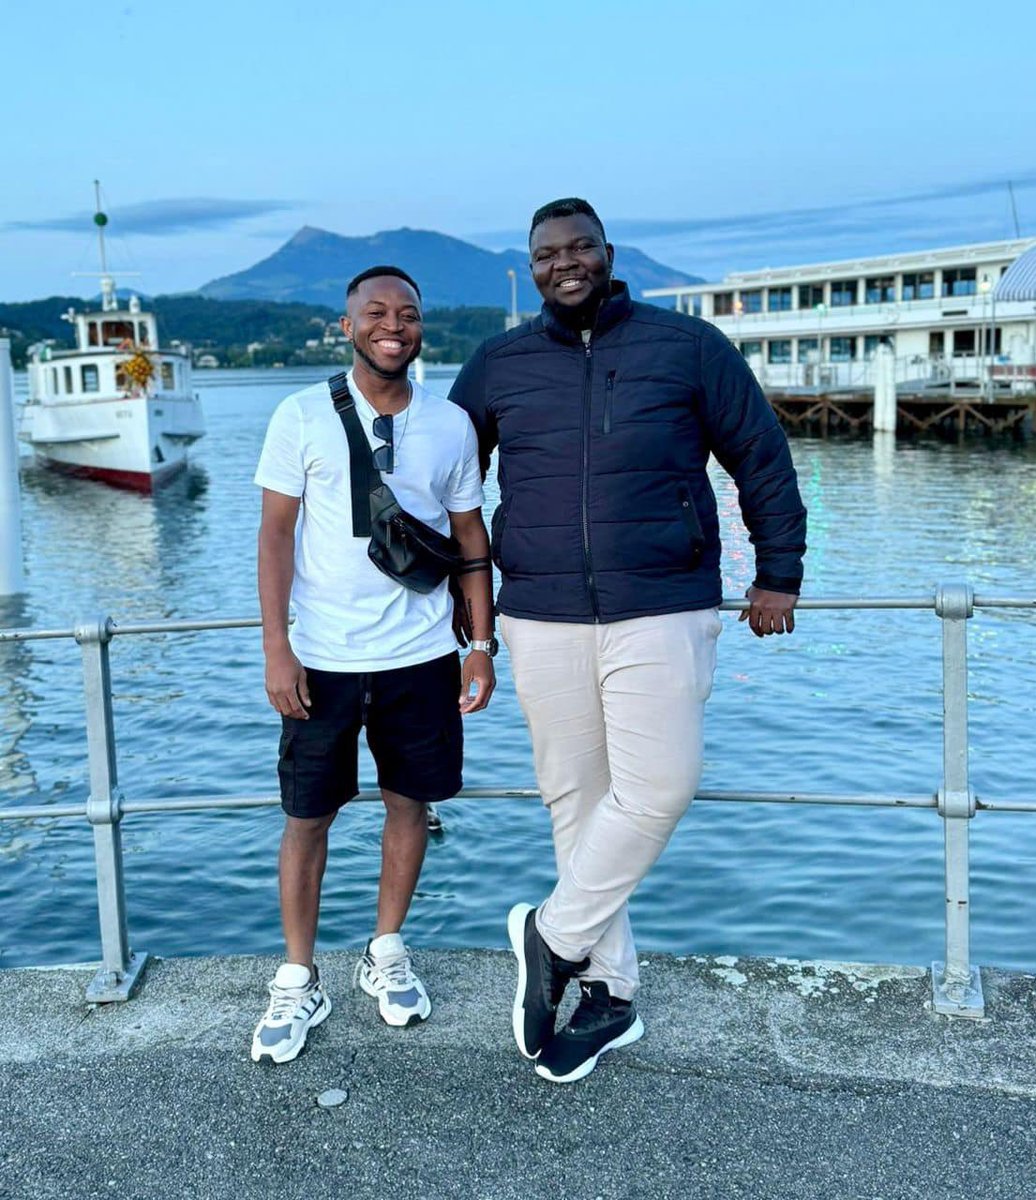 Our General Manager Ameenu Shardow pays a working visit to former player Samuel Alarbi in Luzren during his stay in Switzerland 🇨🇭 for the FIFA.com  Diploma in Club Management course. 

#stillbelieve #IGWT #DFC4LIFE